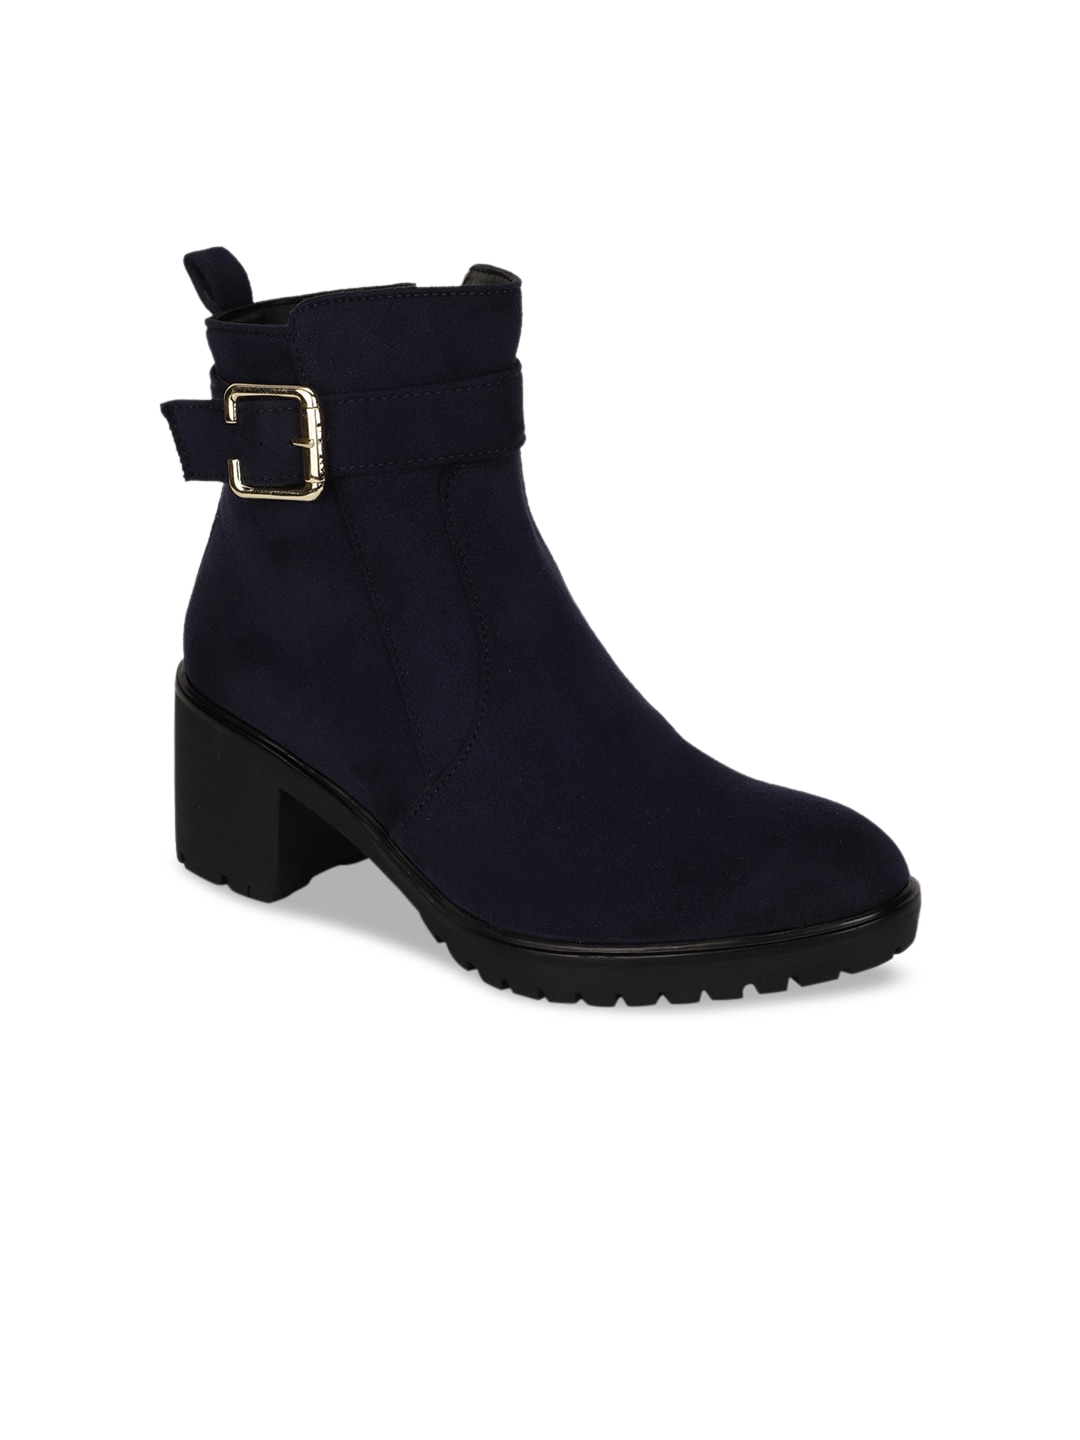 Bruno Manetti Women Navy Blue Suede Block Heeled Boots with Buckles Price in India